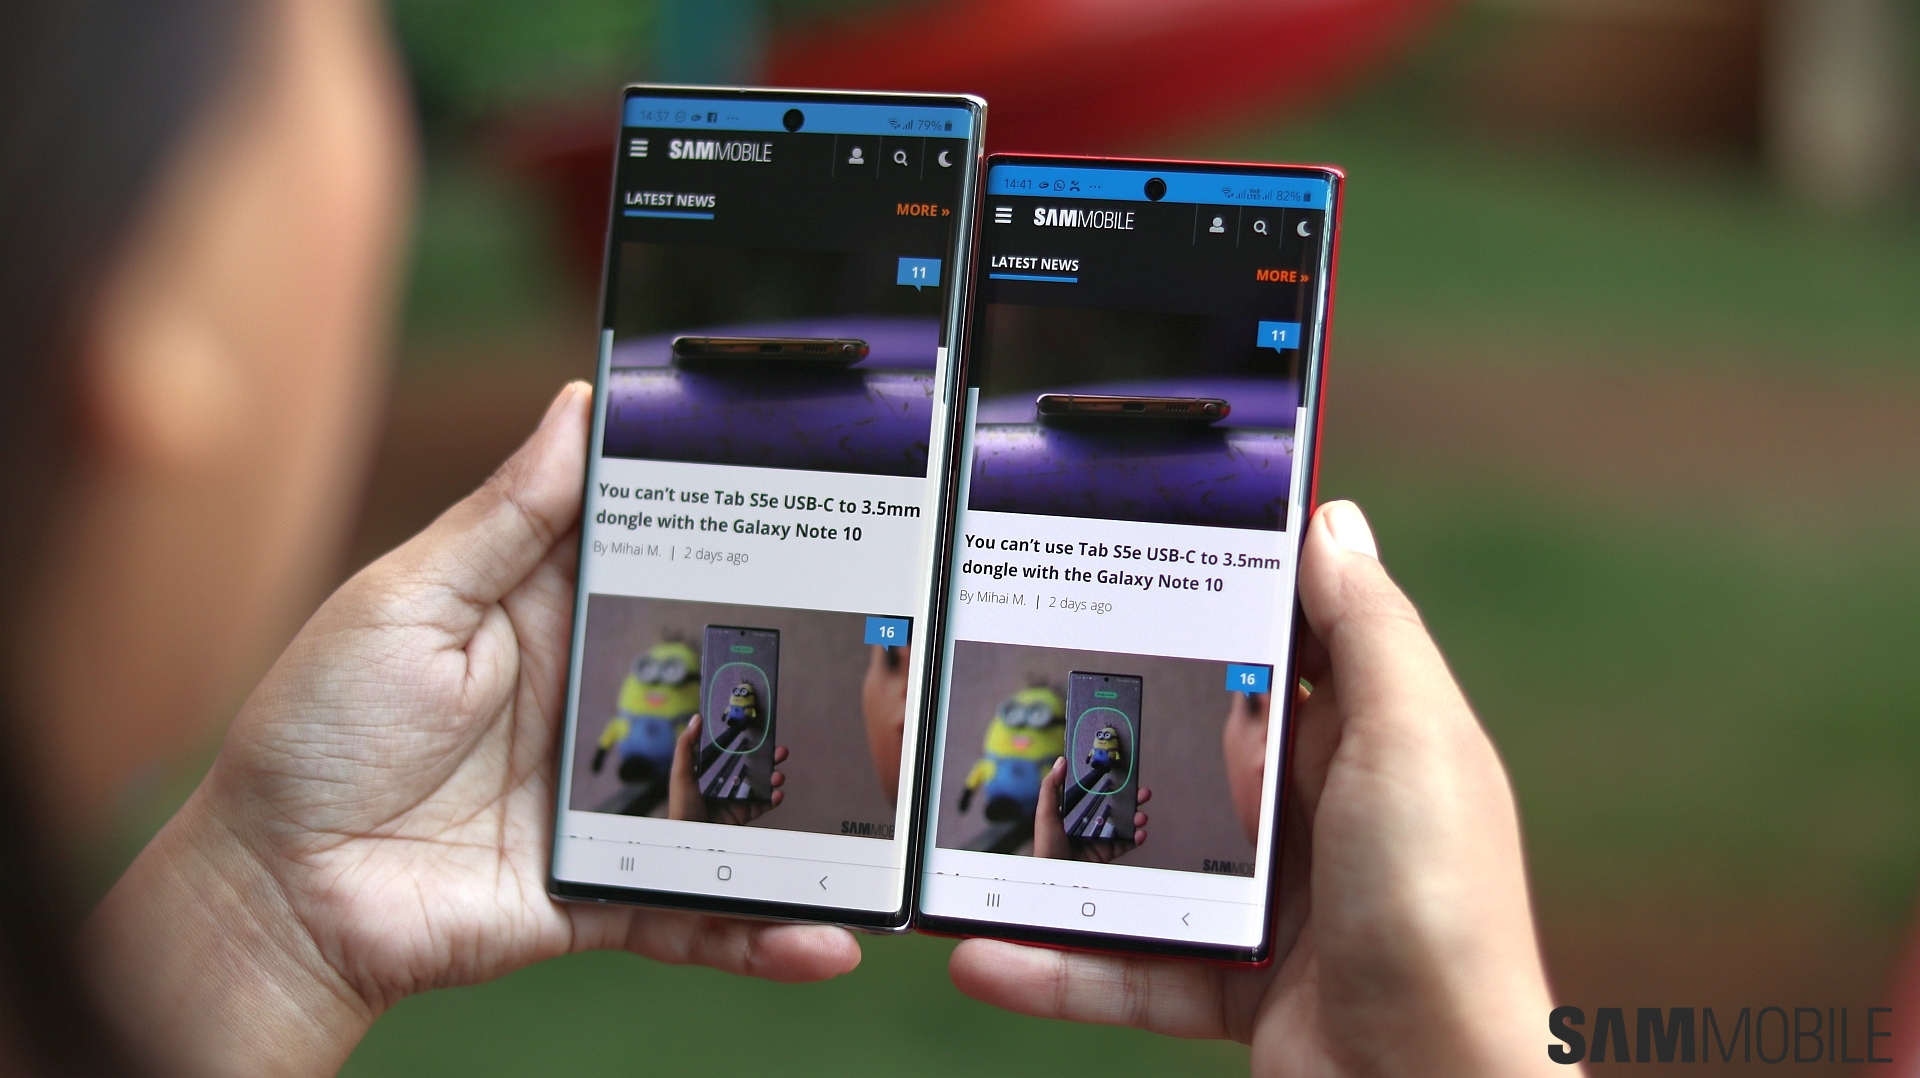 Samsung Galaxy S10 Lite and Note 10 Lite Release Date, Rumors, Features,  and More